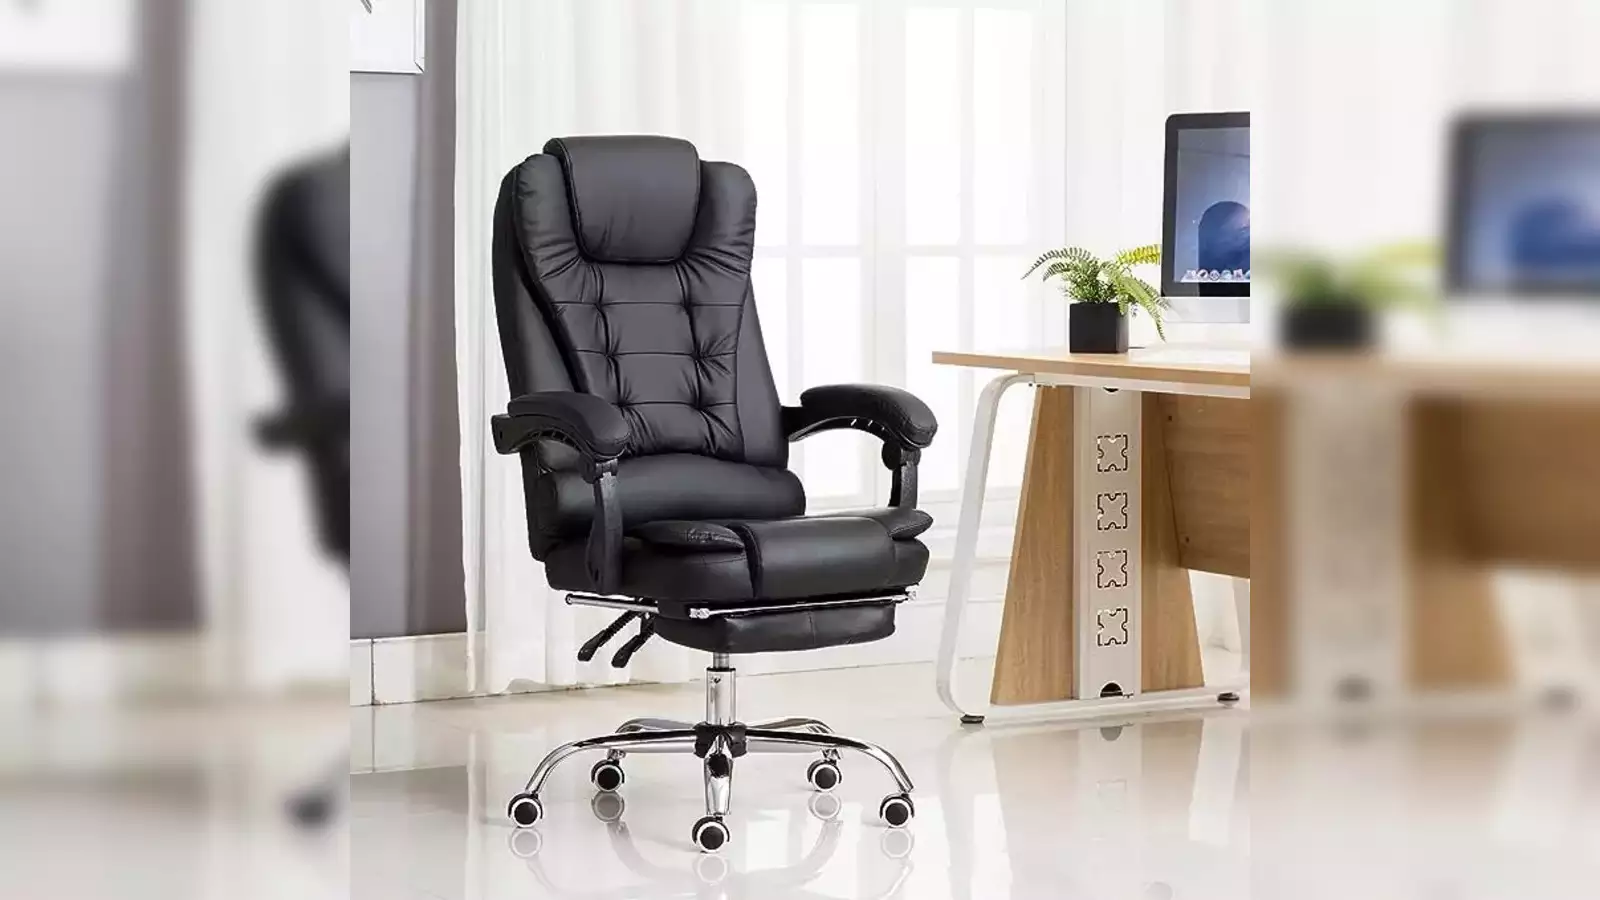 How to choose an office chair? A complete guide